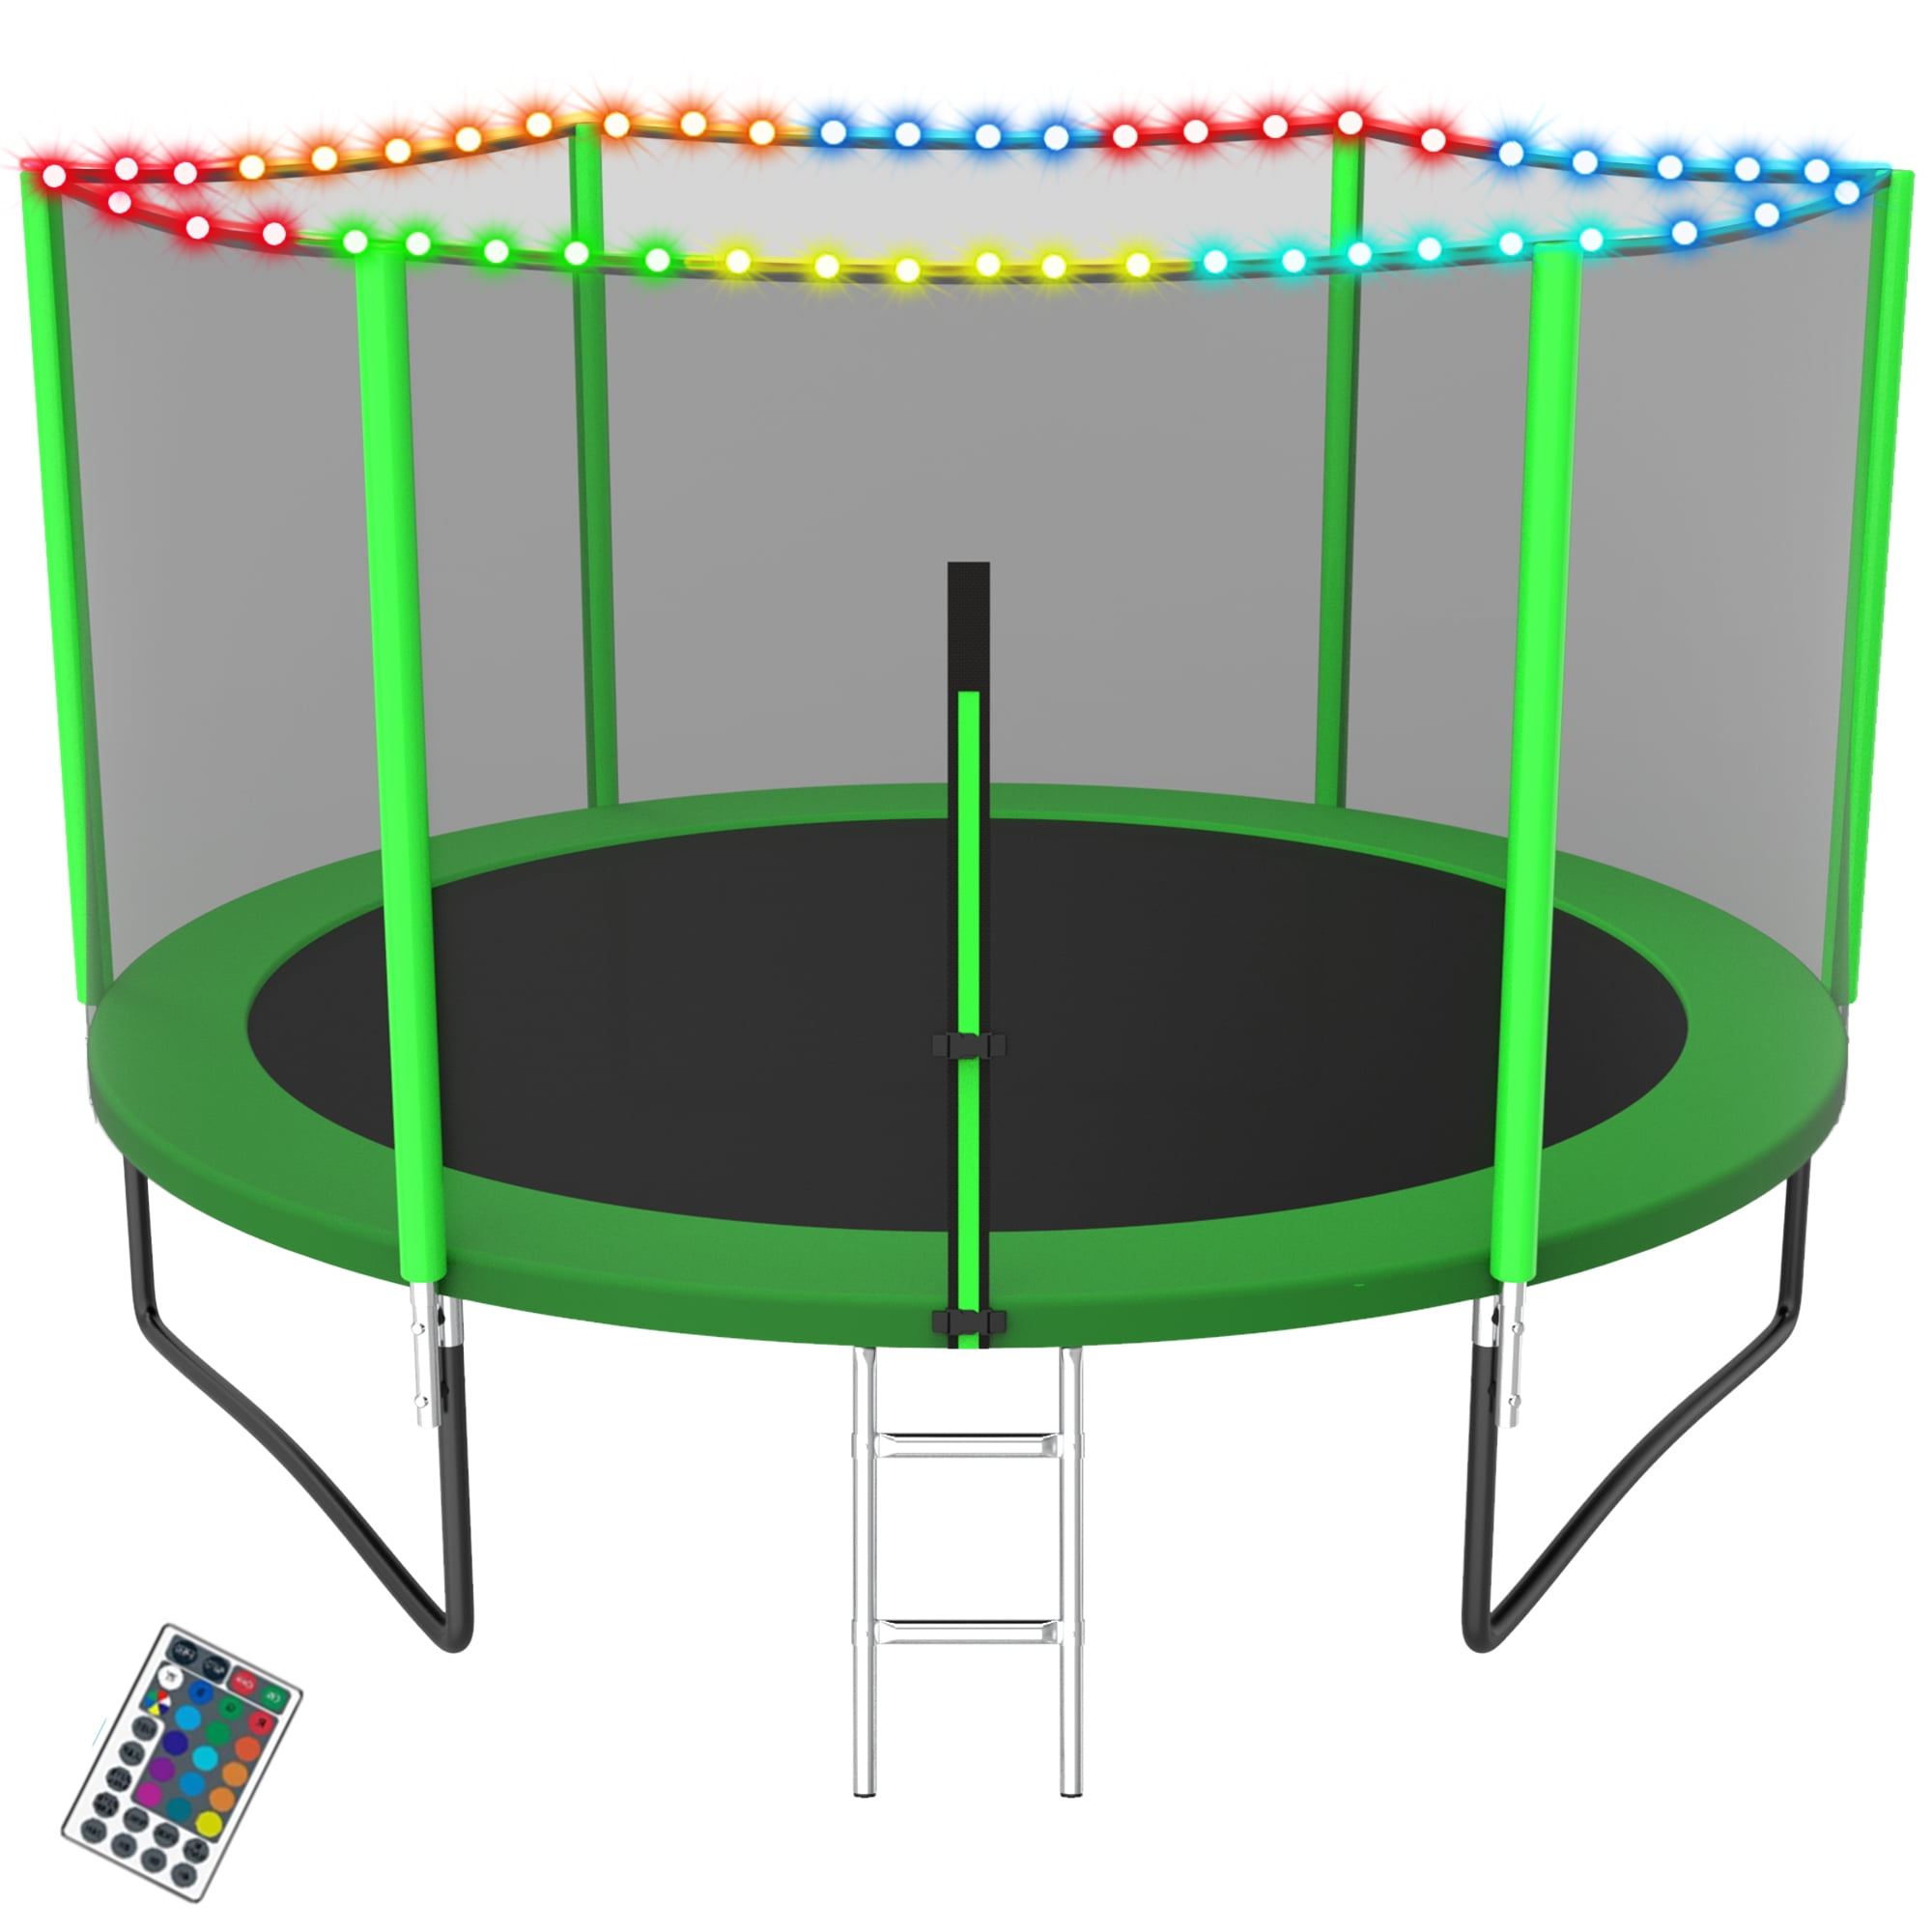 YORIN Trampoline for 2-3 Kids, 8 FT Trampoline for Adults with Enclosure Net, Ladder, 800LBS Weight Capacity Outdoor Round Recreational Trampoline, ASTM Approved Heavy Duty Trampoline